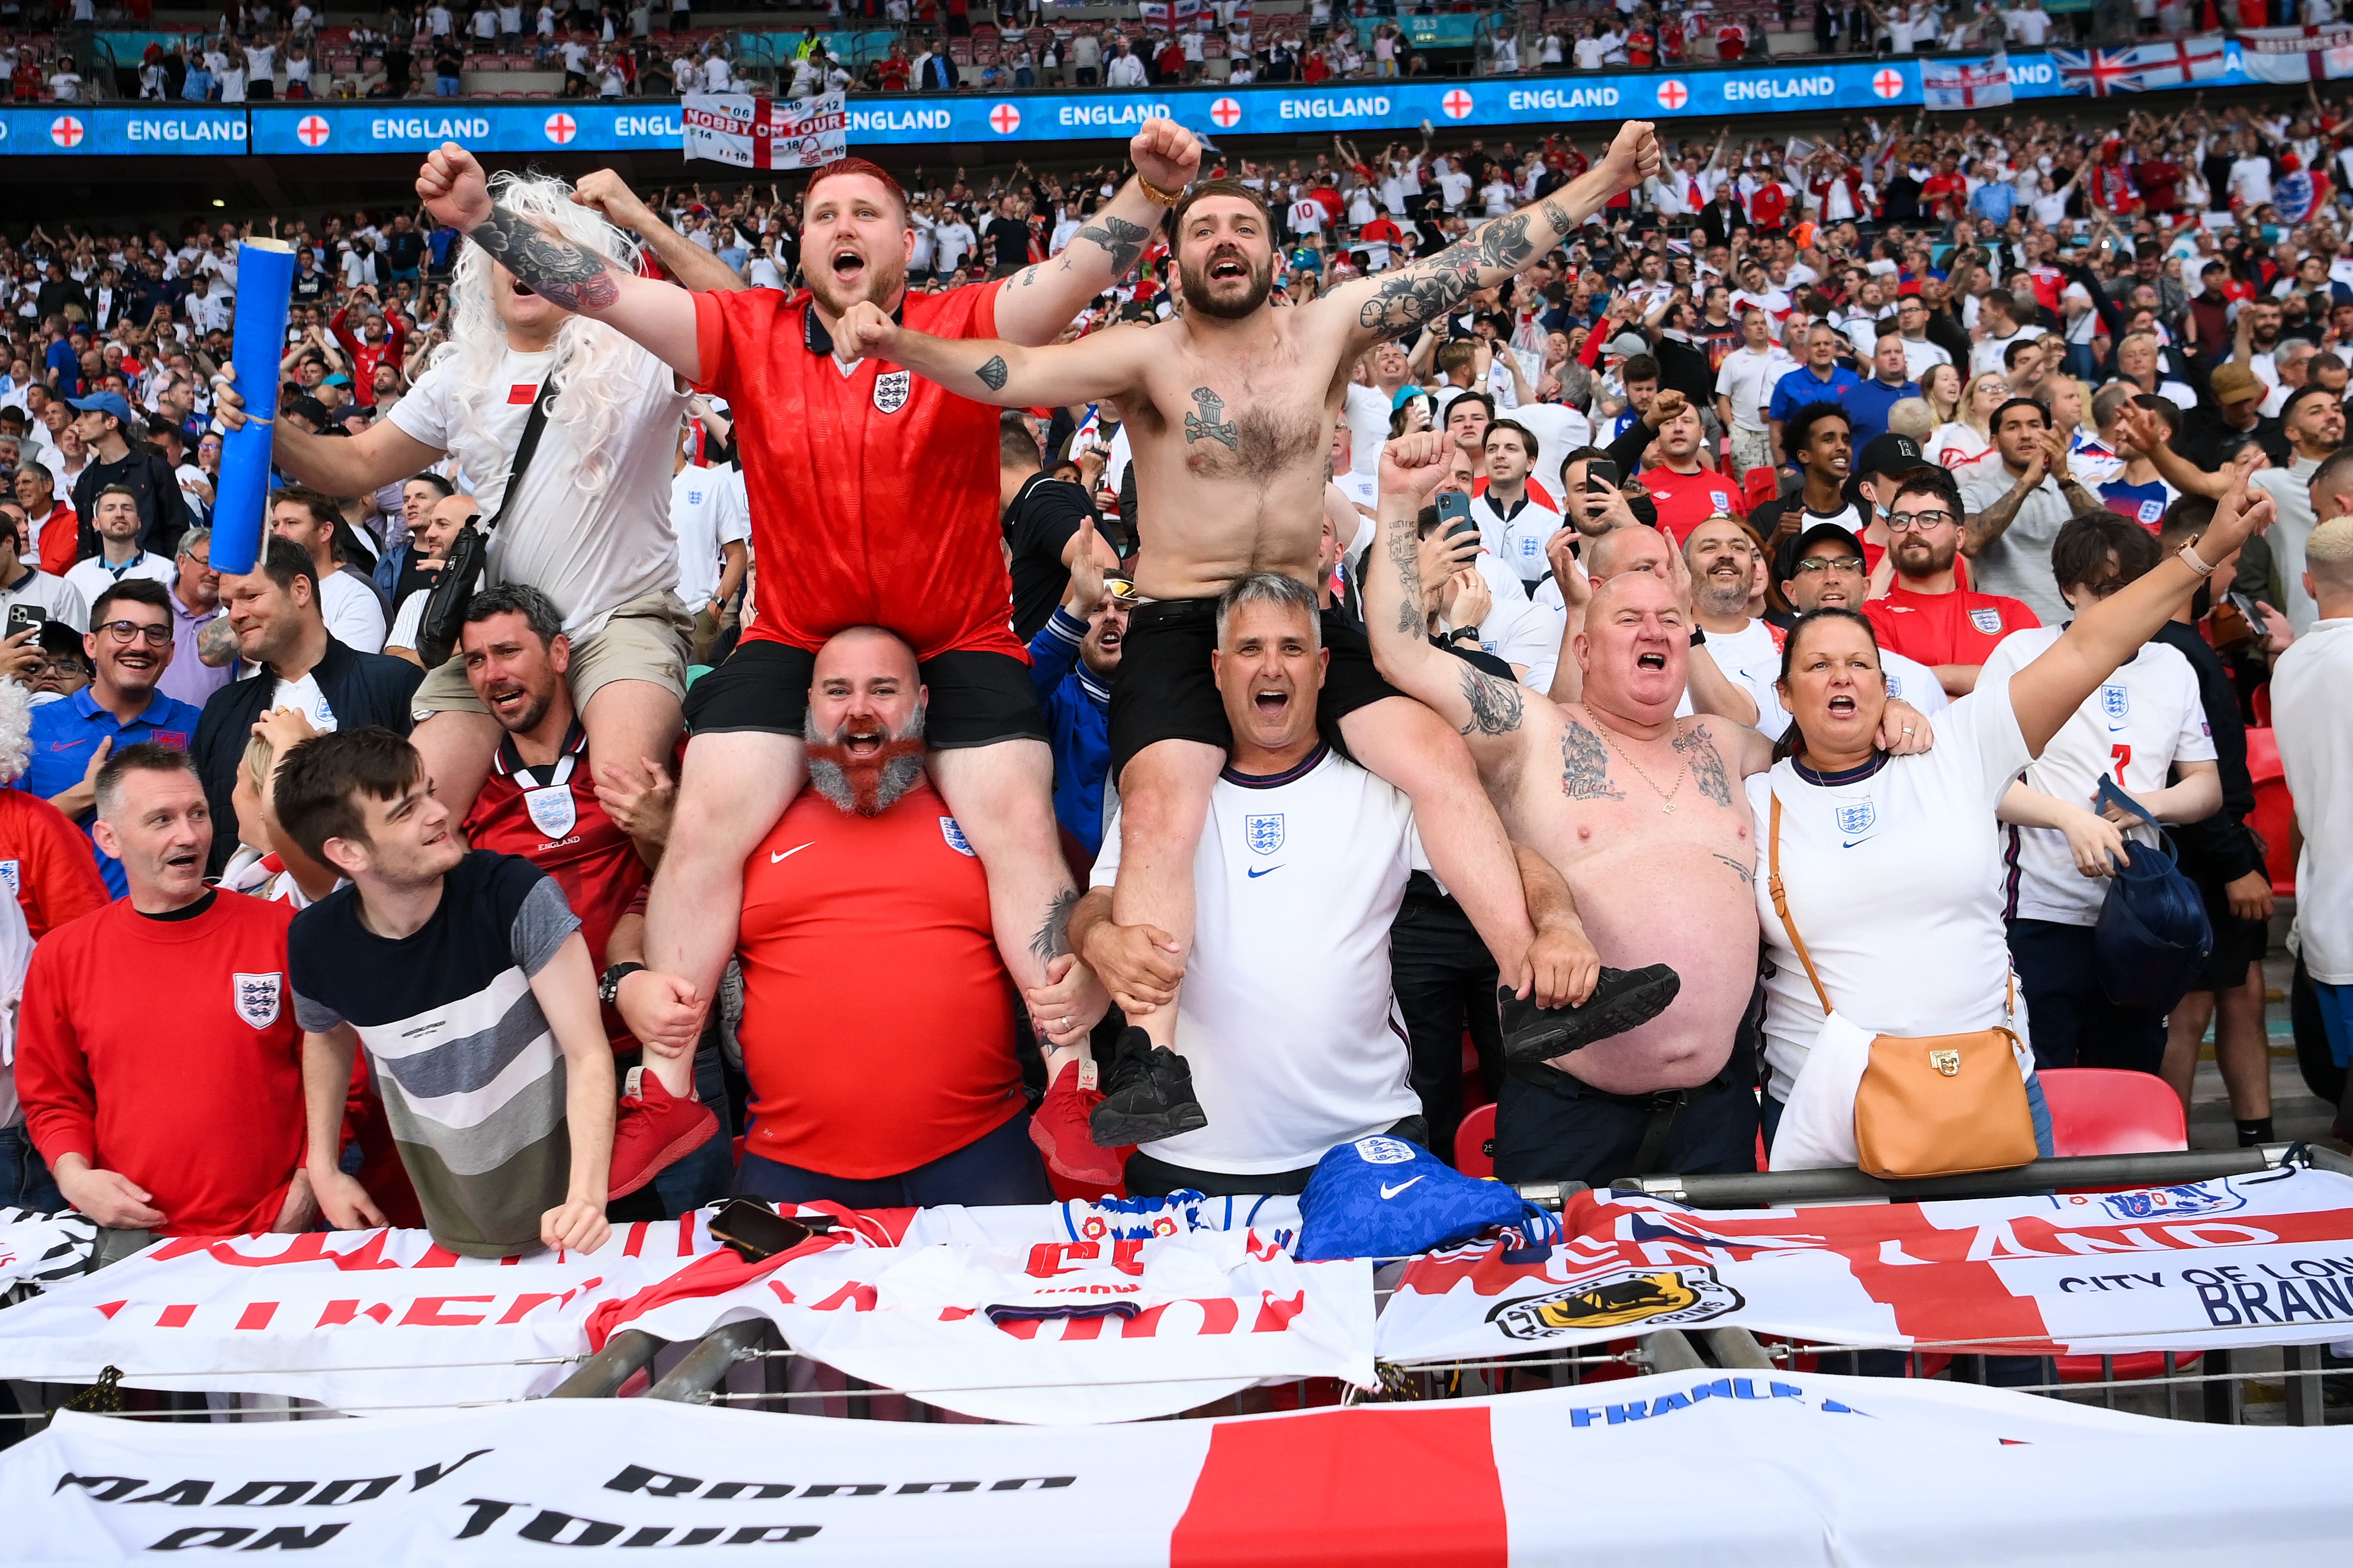 Some 300,000 fans were allowed into Wembley Stadium during the Euro 2020 tournament